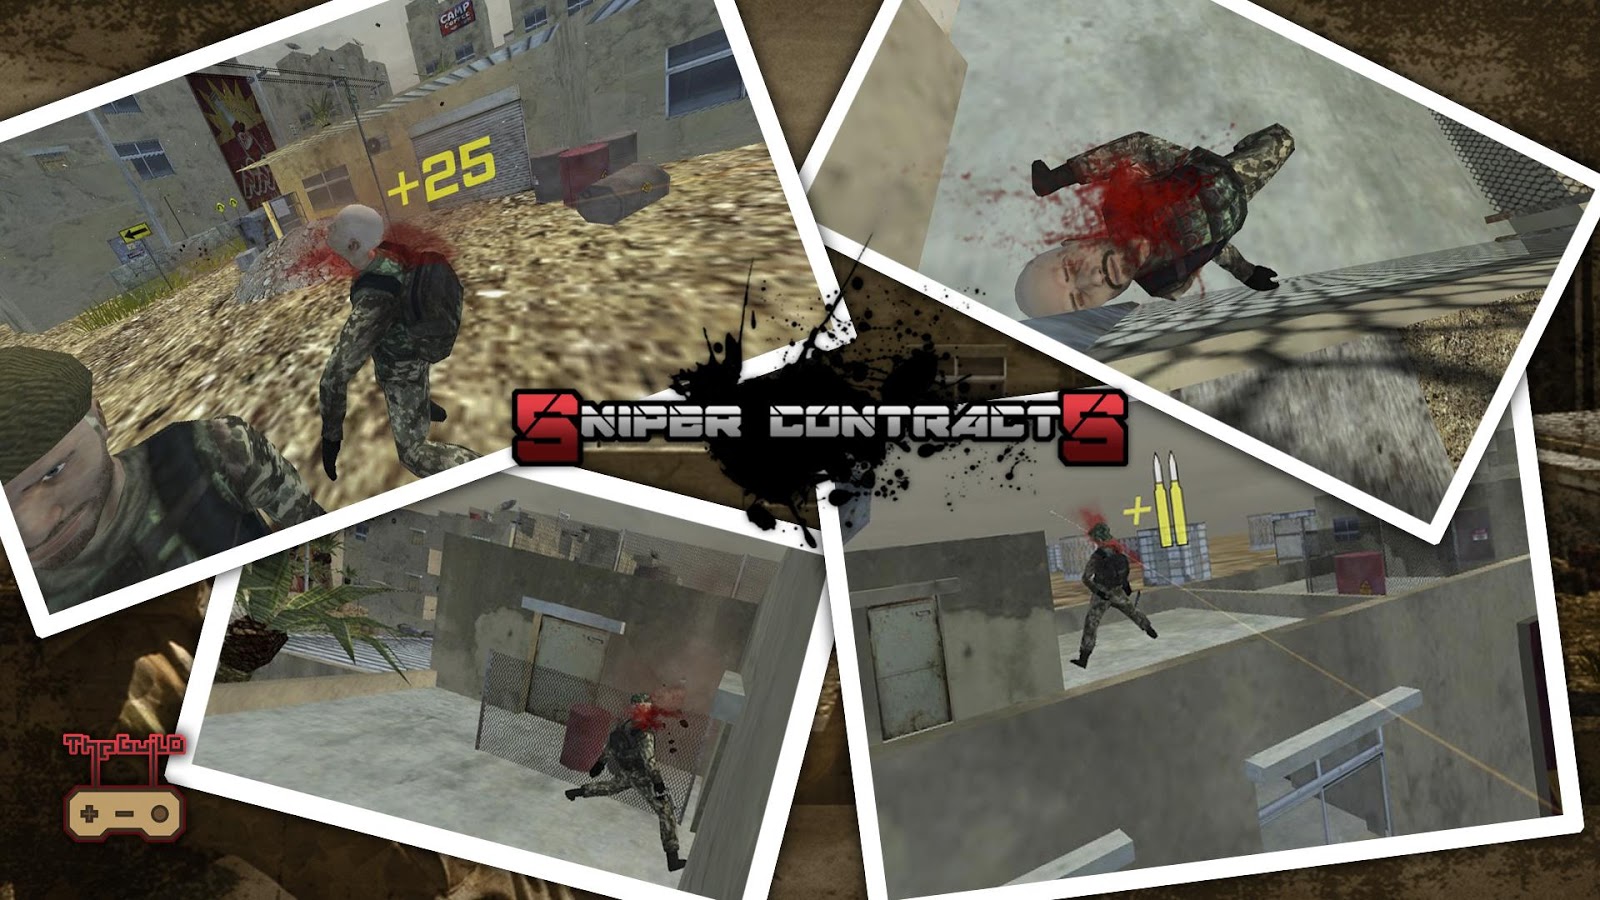 download sniper contracts for free